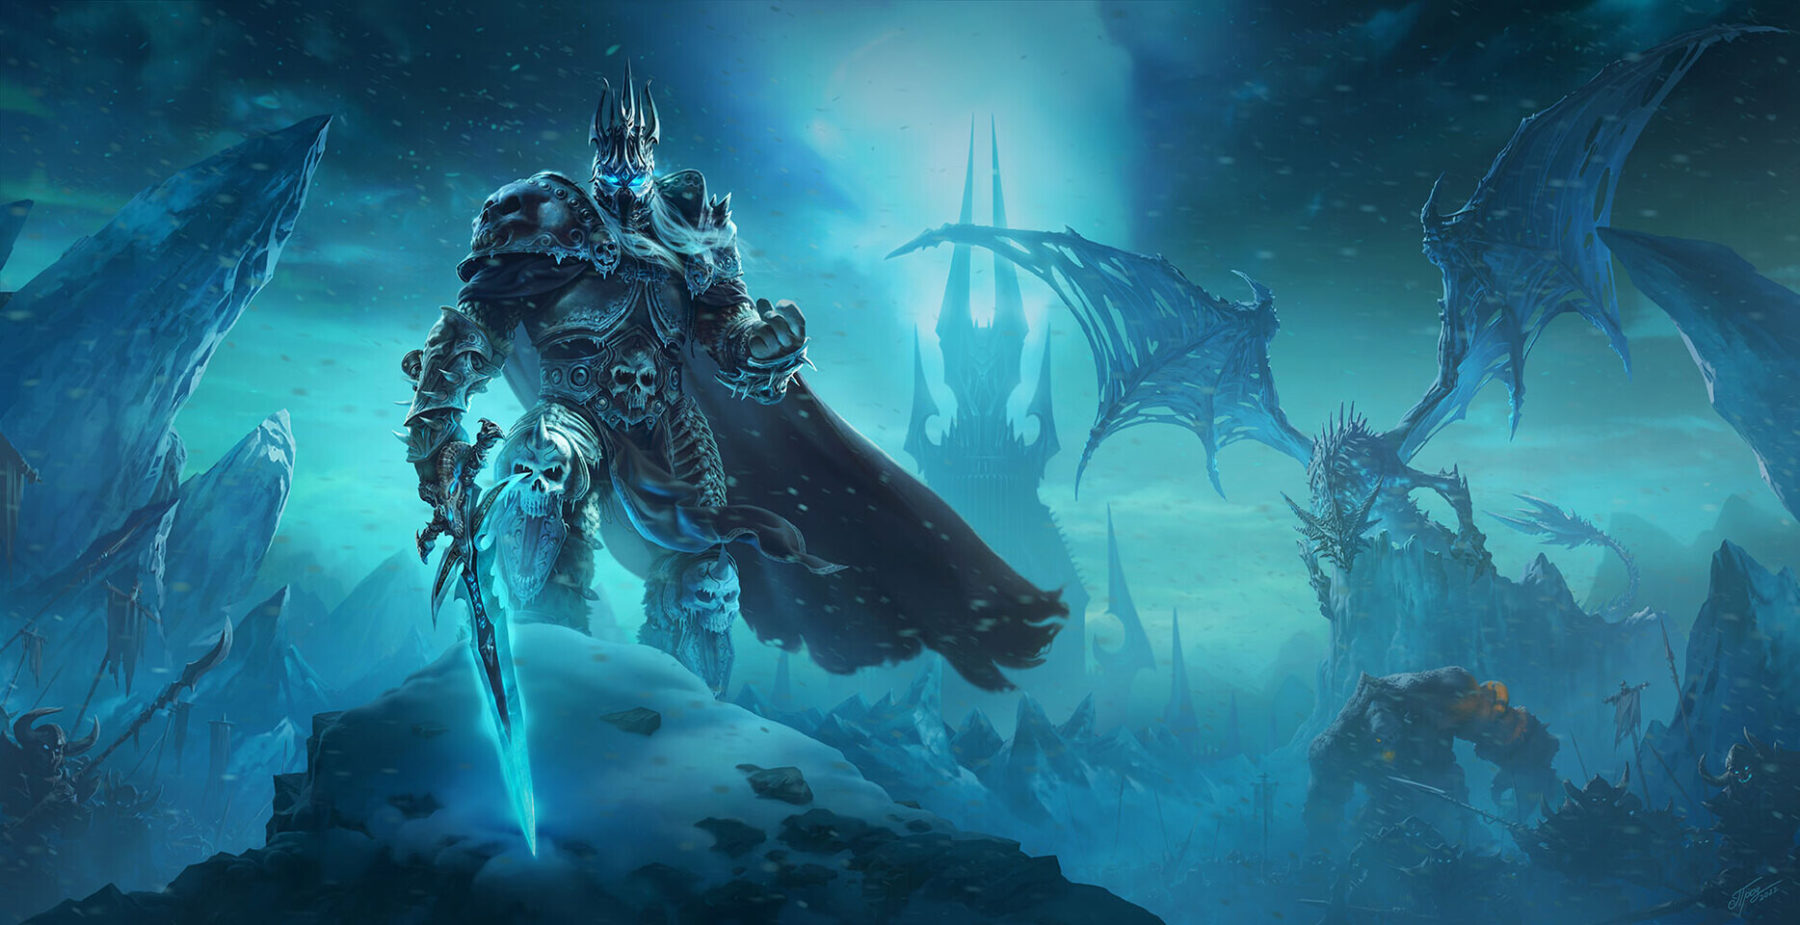 World of Warcraft: Wrath of the Lich King Classic to Transport Players Back to the Icy Realm of Northrend Later This Year -